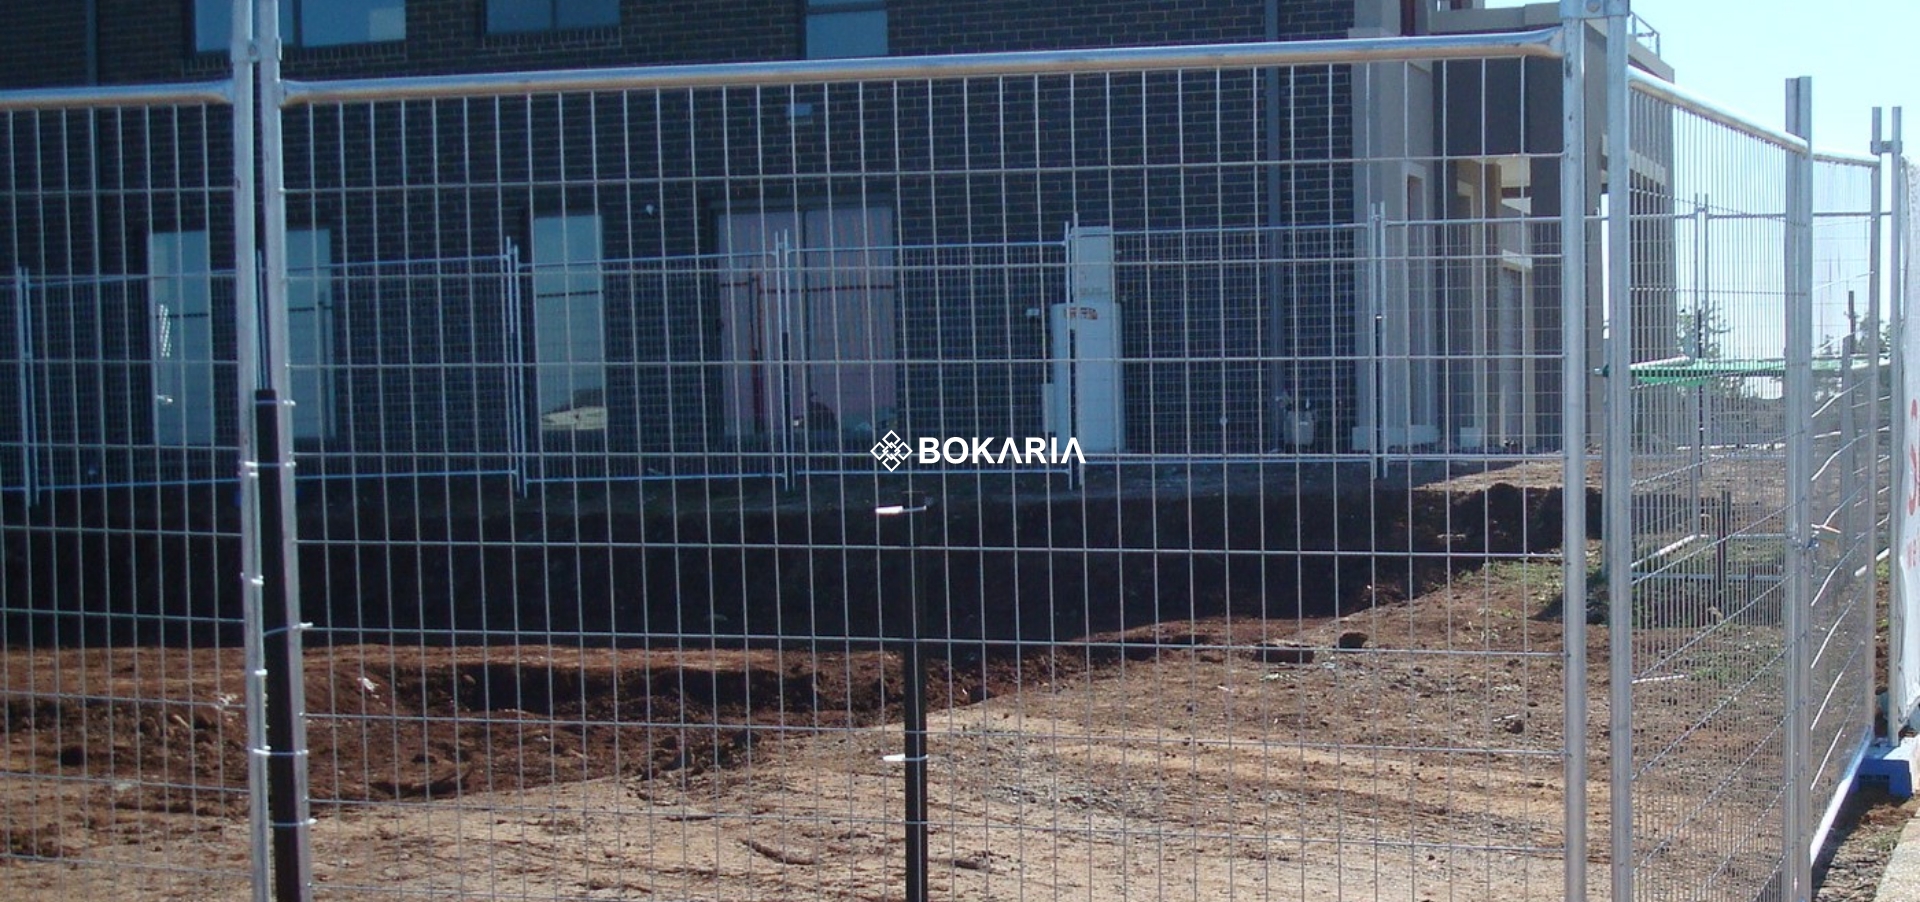 temporary-fencing-panels-bokaria-wirenetting-industries-home-slide-1